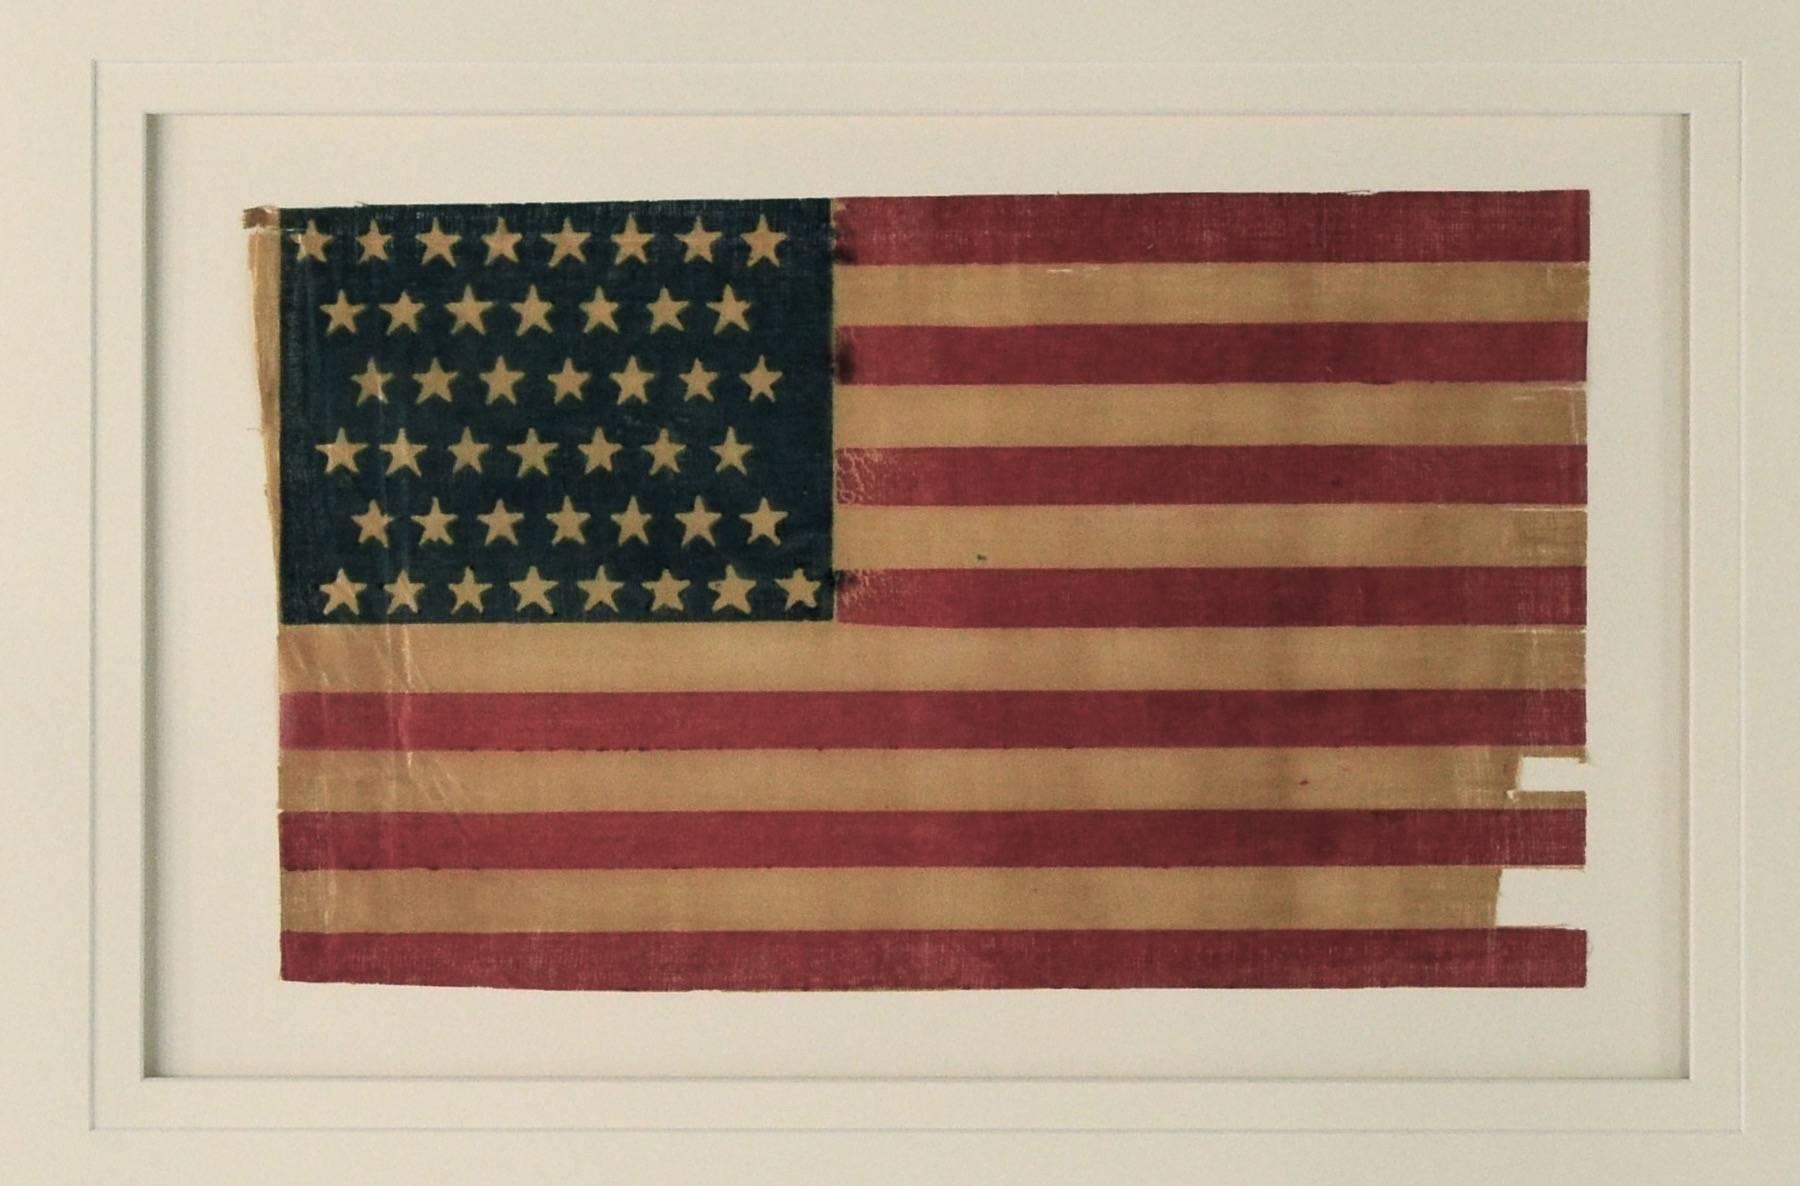 Authentic antique 44 star flag, circa 1890. Made of starched glazed gauze fabric.
Conservation framing with UV acrylic. 44 Star Flags are fairly rare.
 